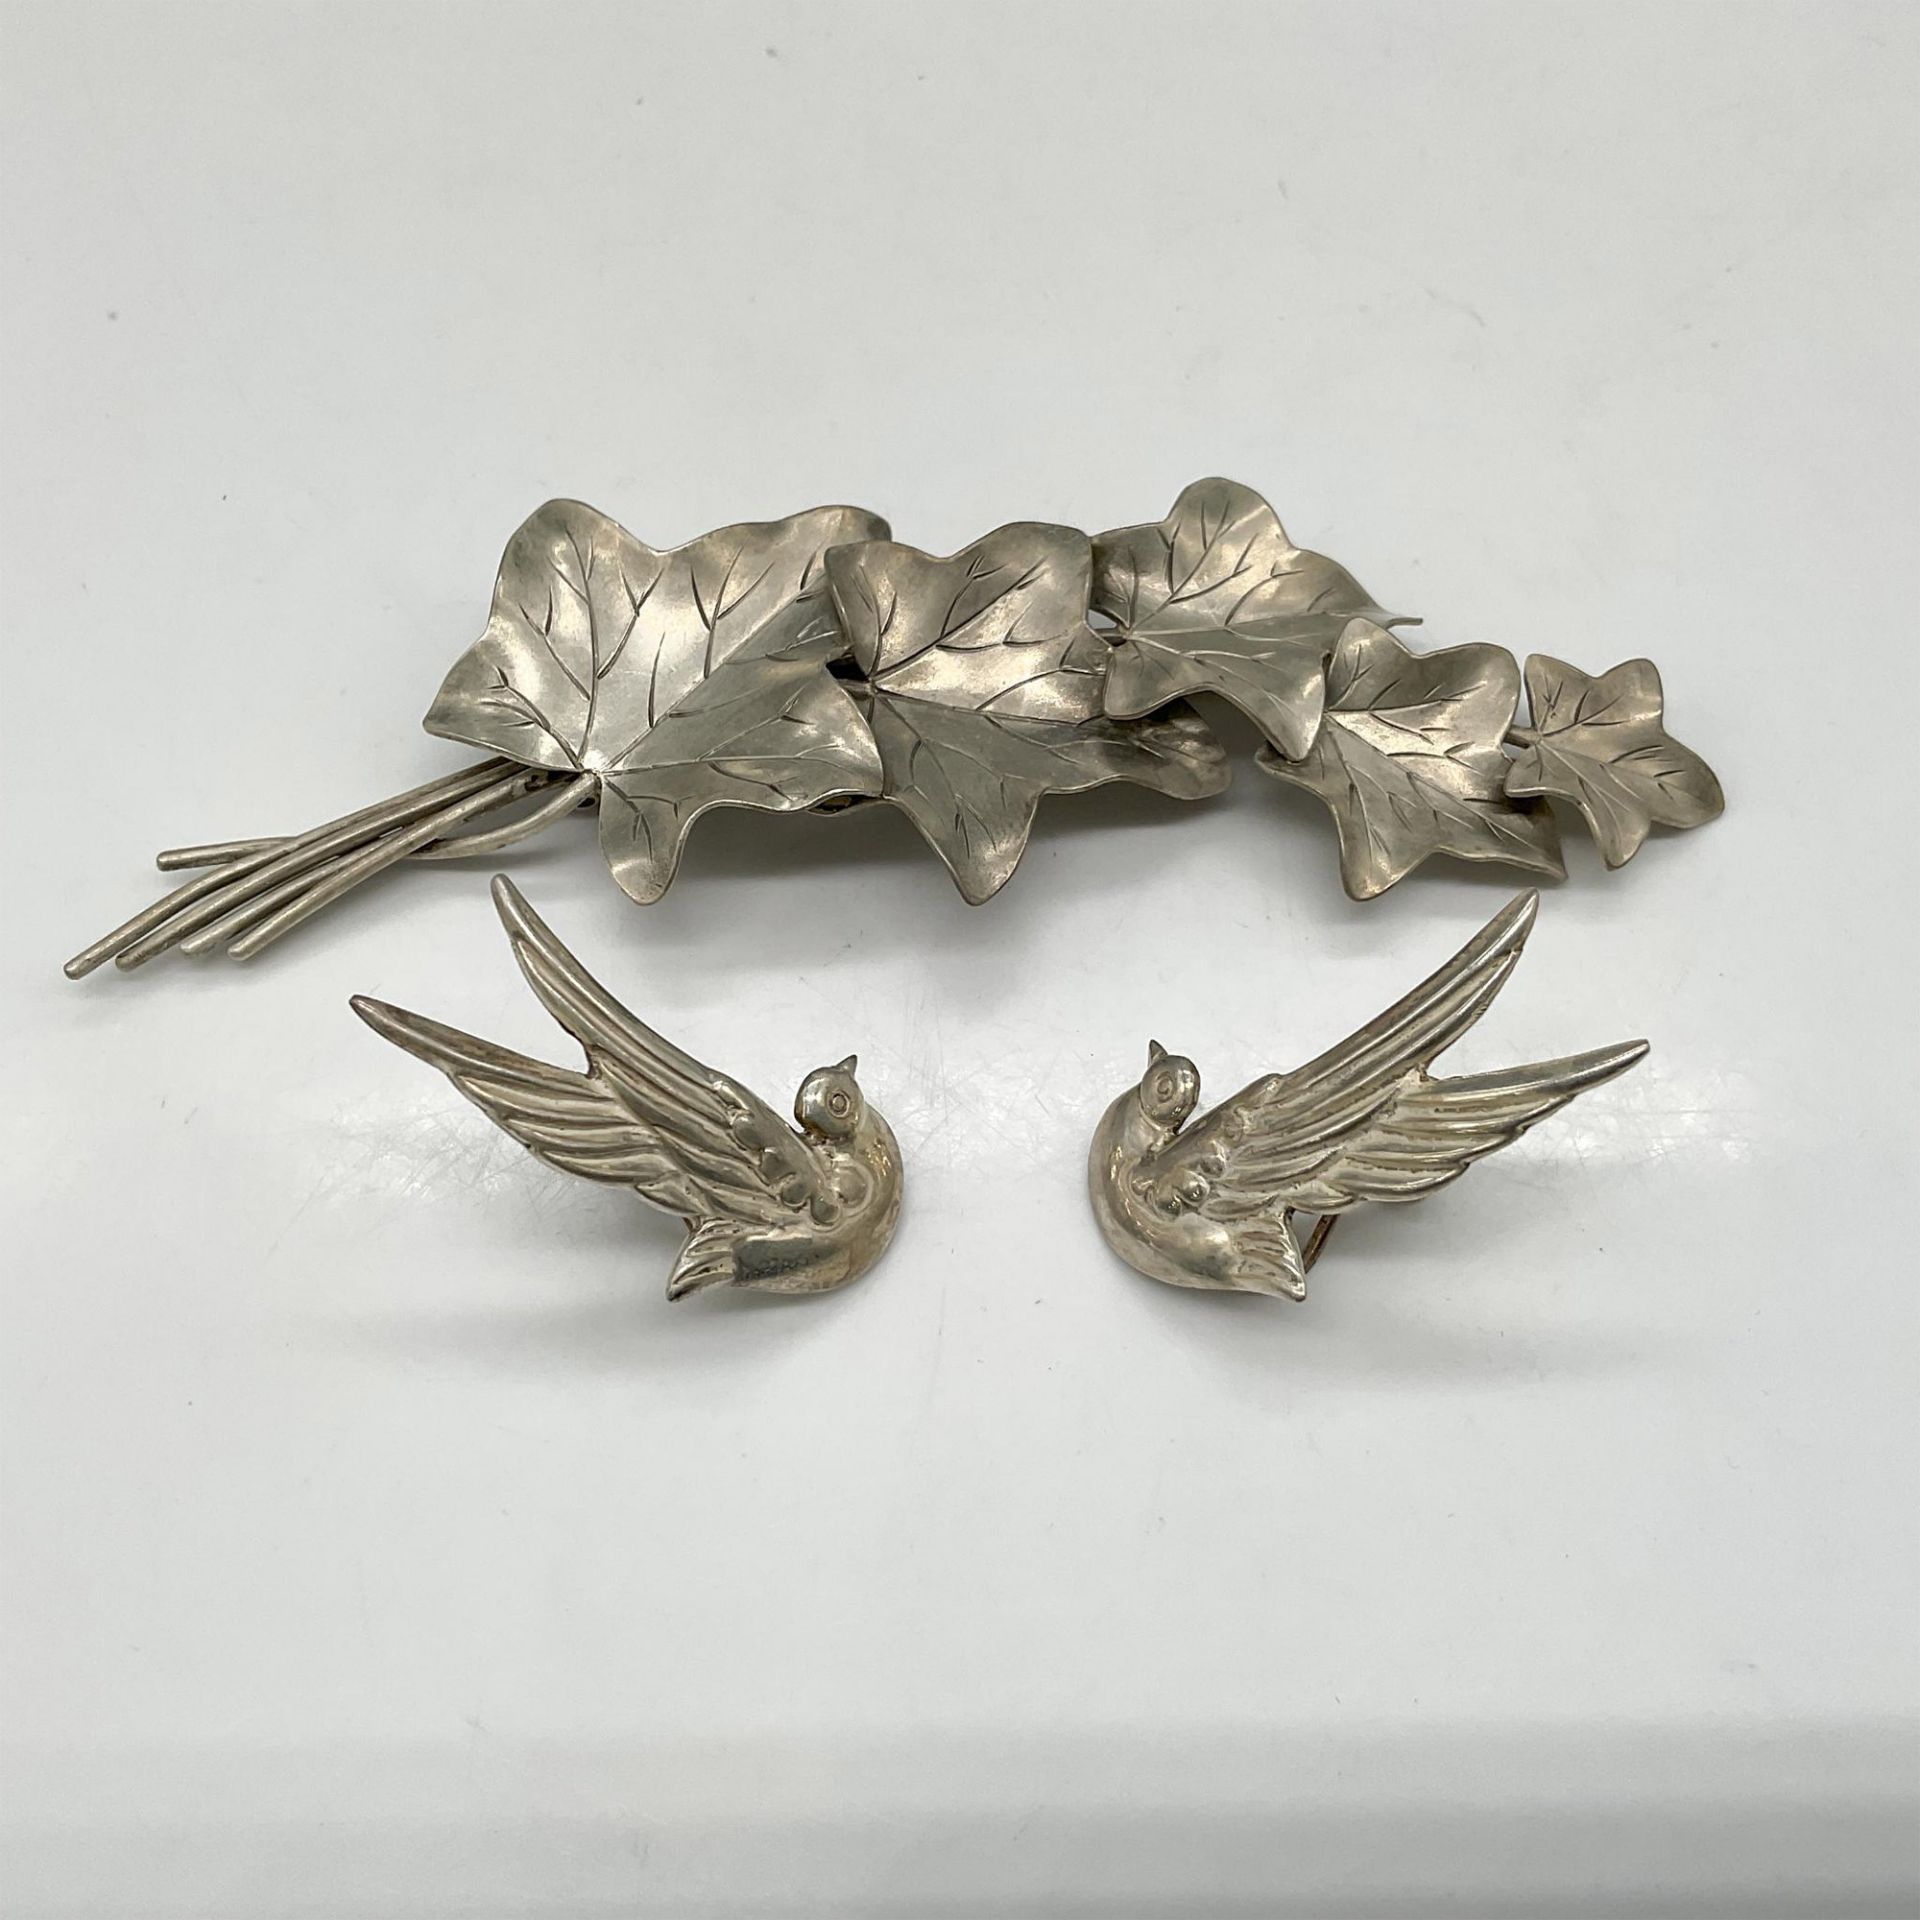 3pc Sterling Silver Leaf Pin plus Dove Screw back Earrings - Image 2 of 3